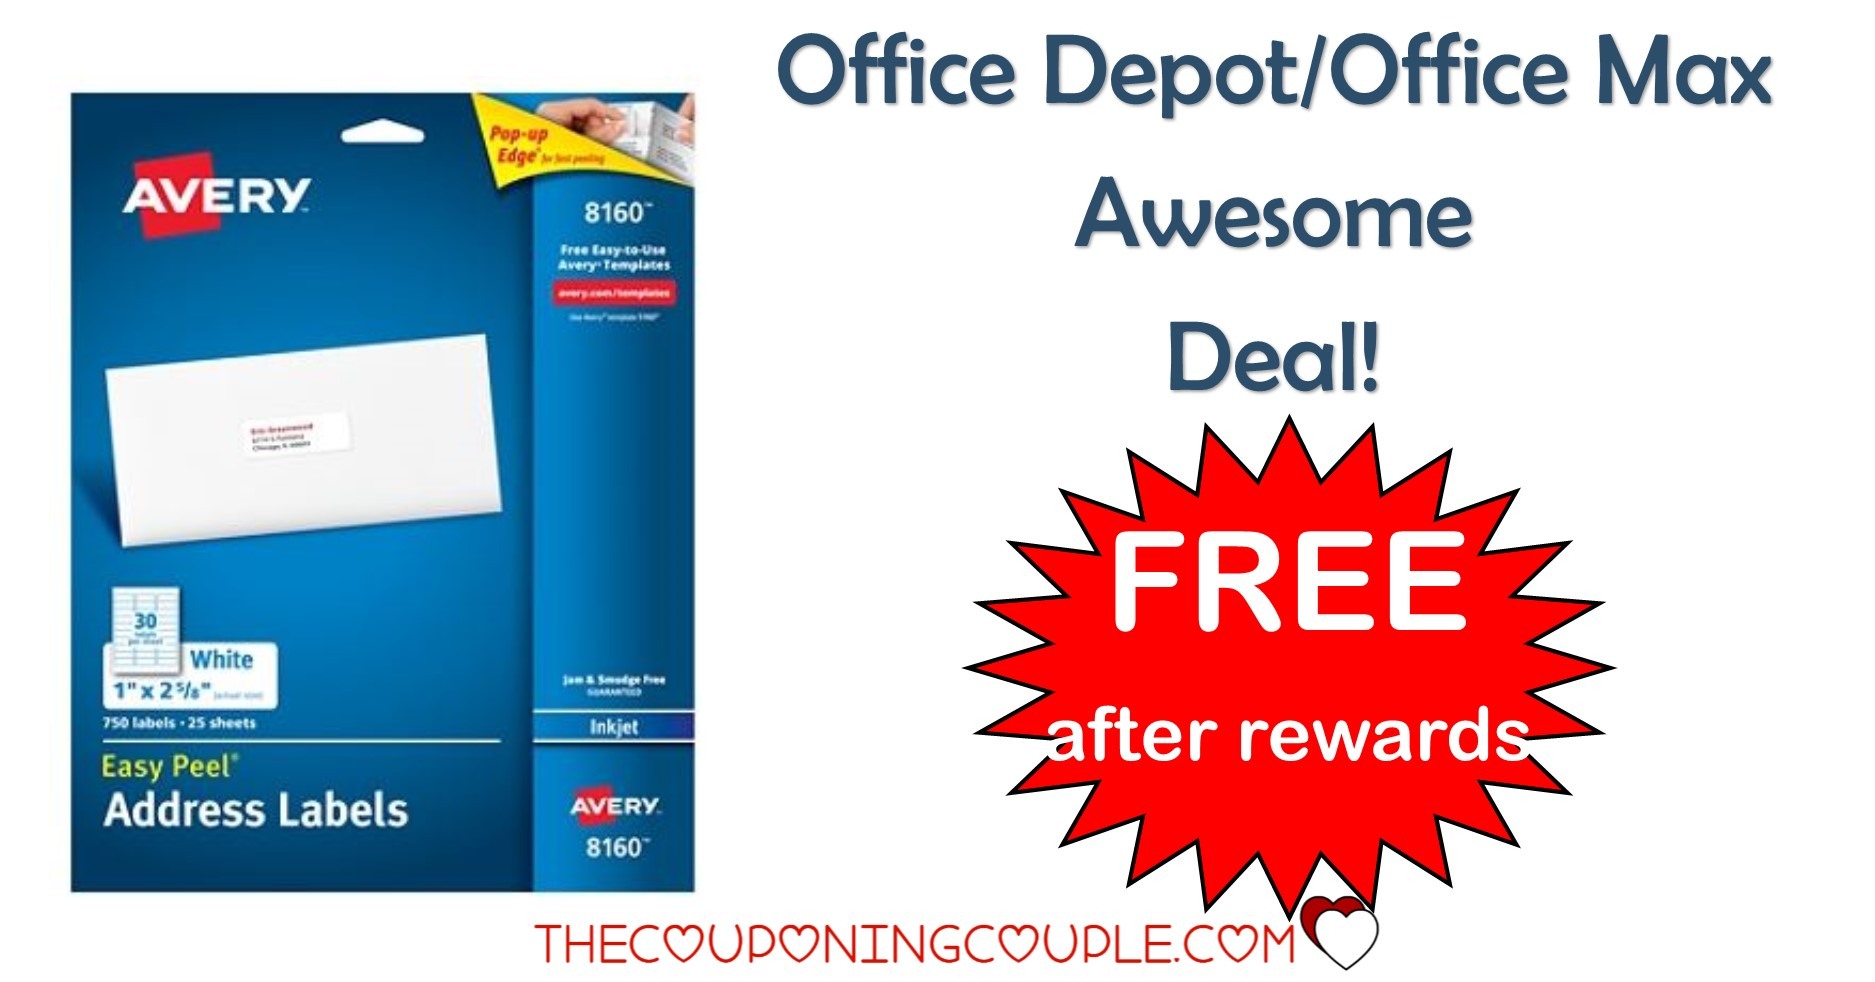 Office Depot Office Max: Avery Address Labels – Free After Intended For Office Max Label Templates